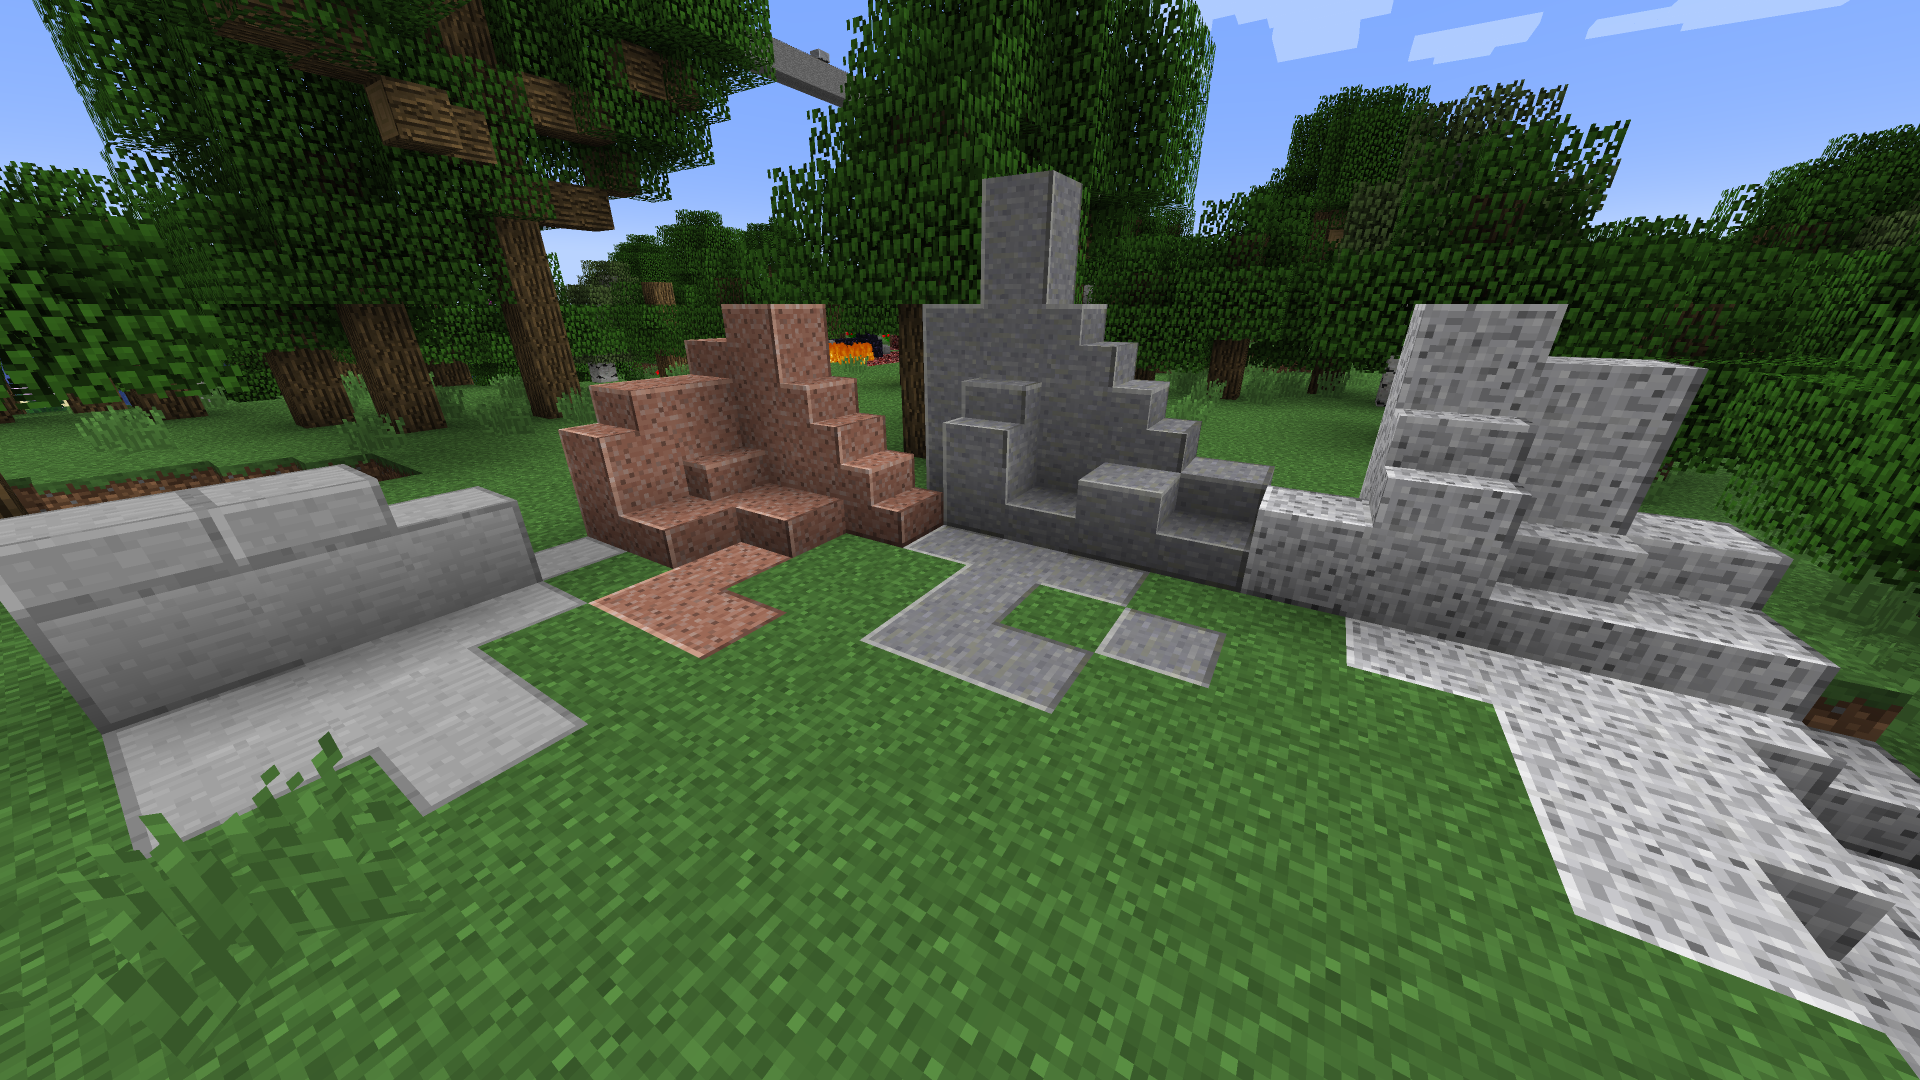 With texture pack (USING OPITFINE FOR THE FIX)
ITS BEEN FIXED ON CONTINUTIY